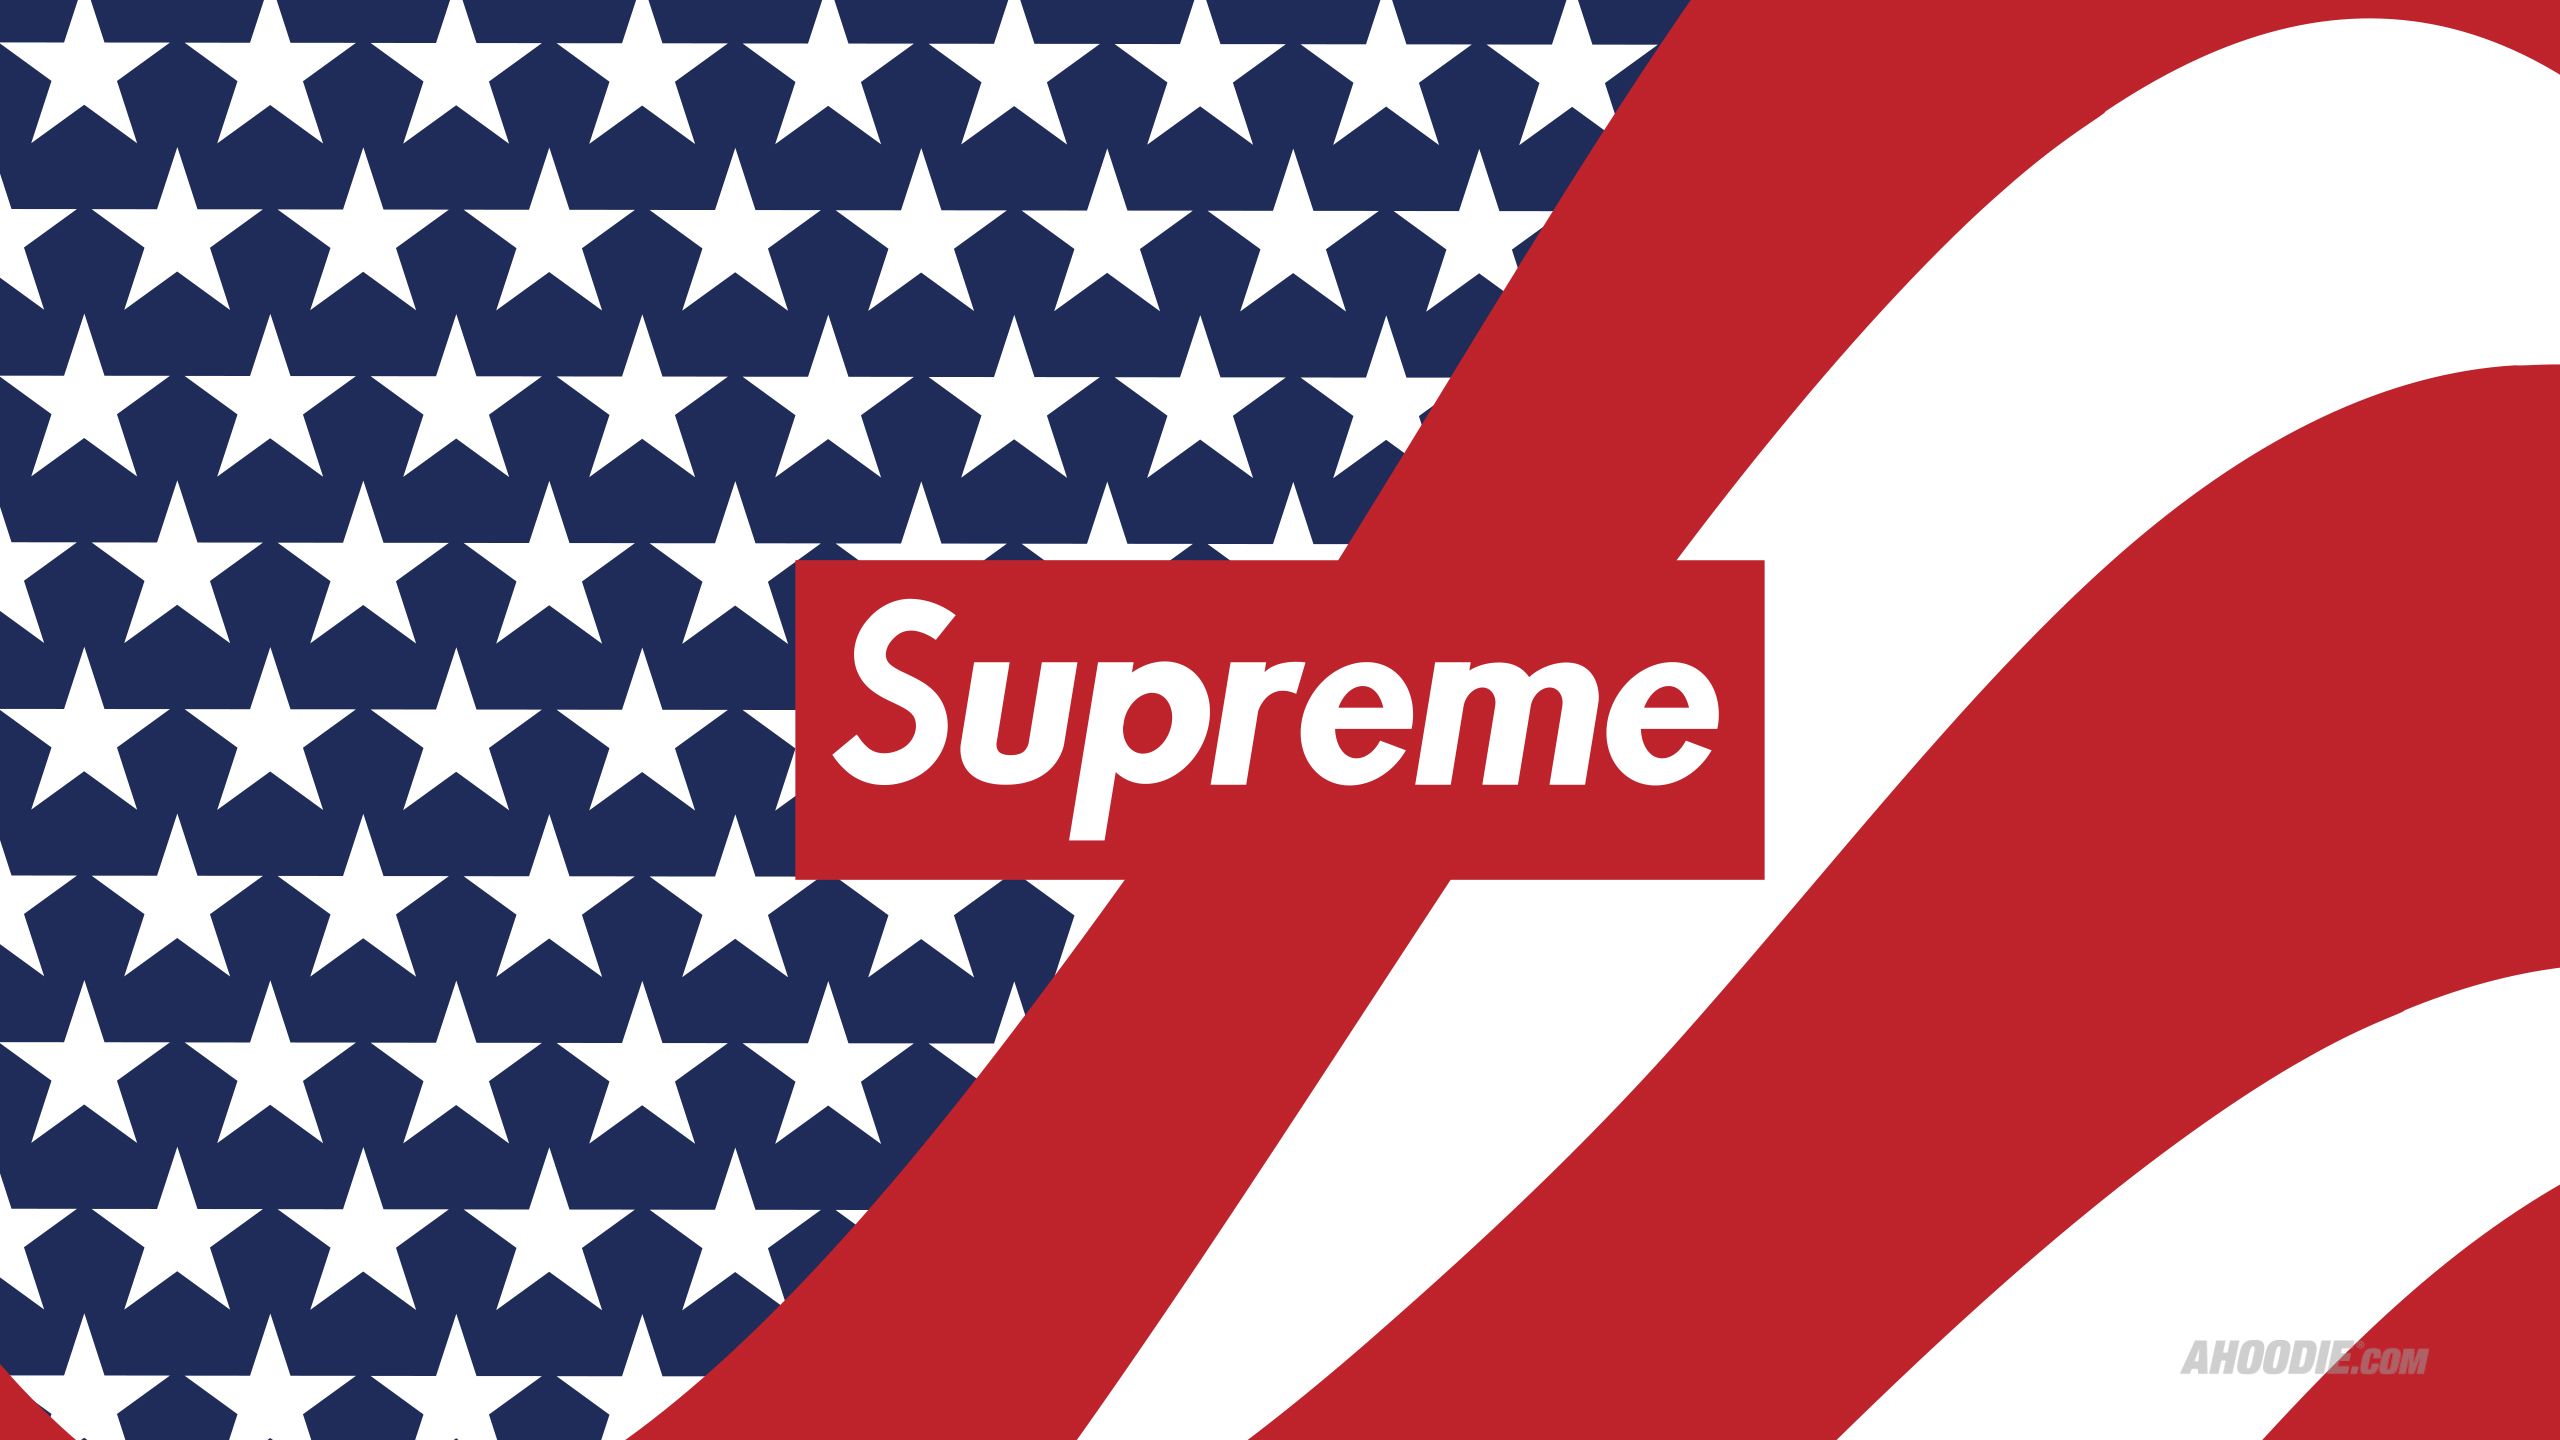 Wallpaper Wednesdays Post Your Supreme Related iPhone iPad Or